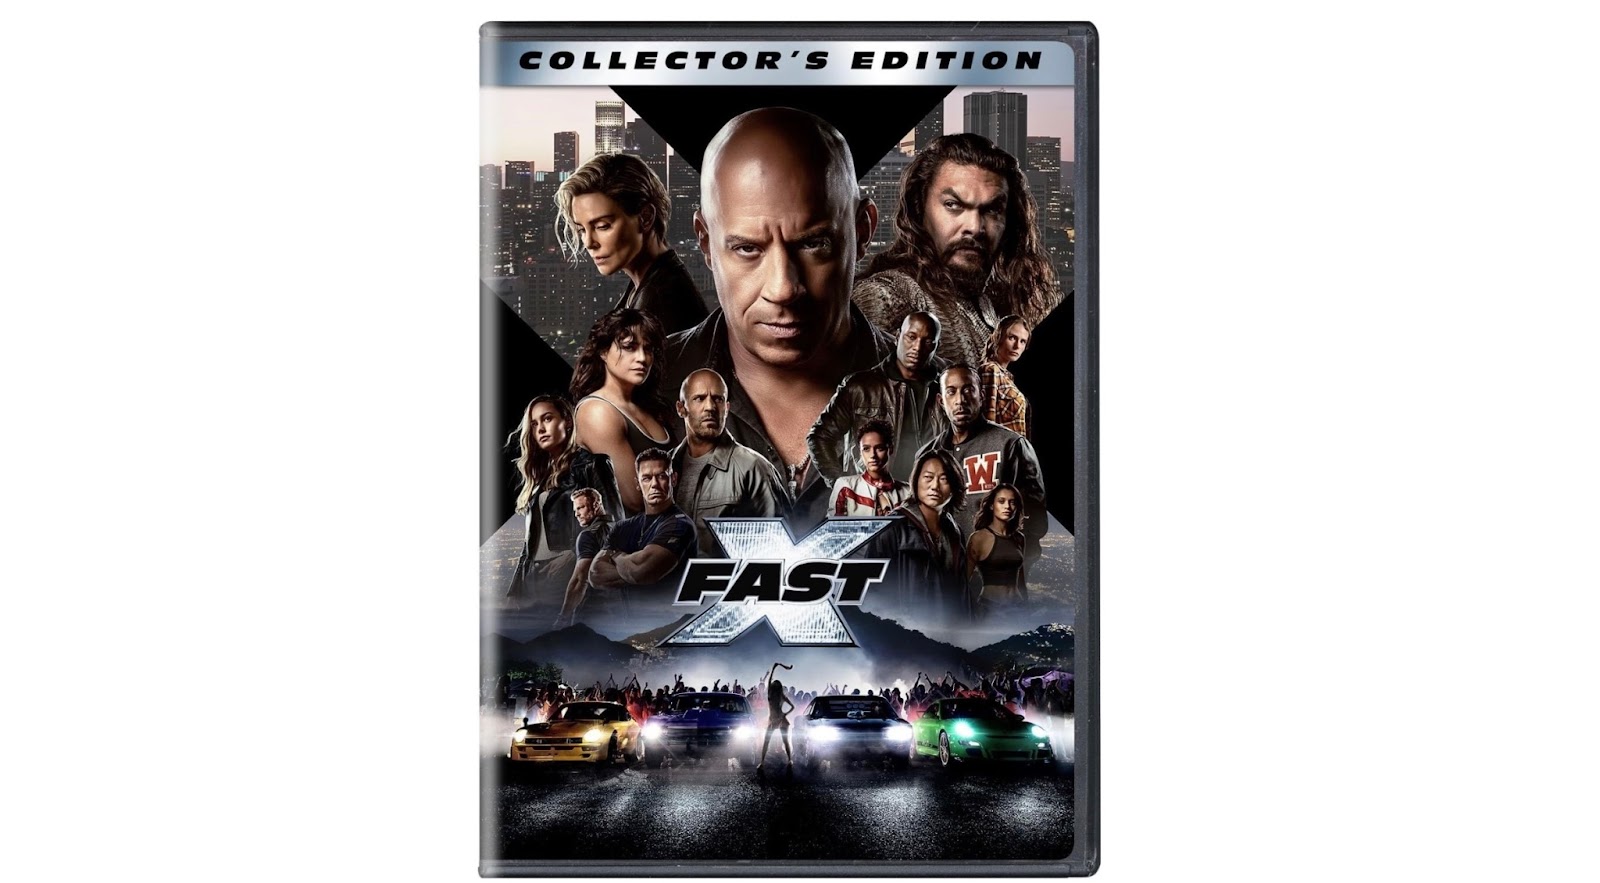 Fast X movie cover on white background